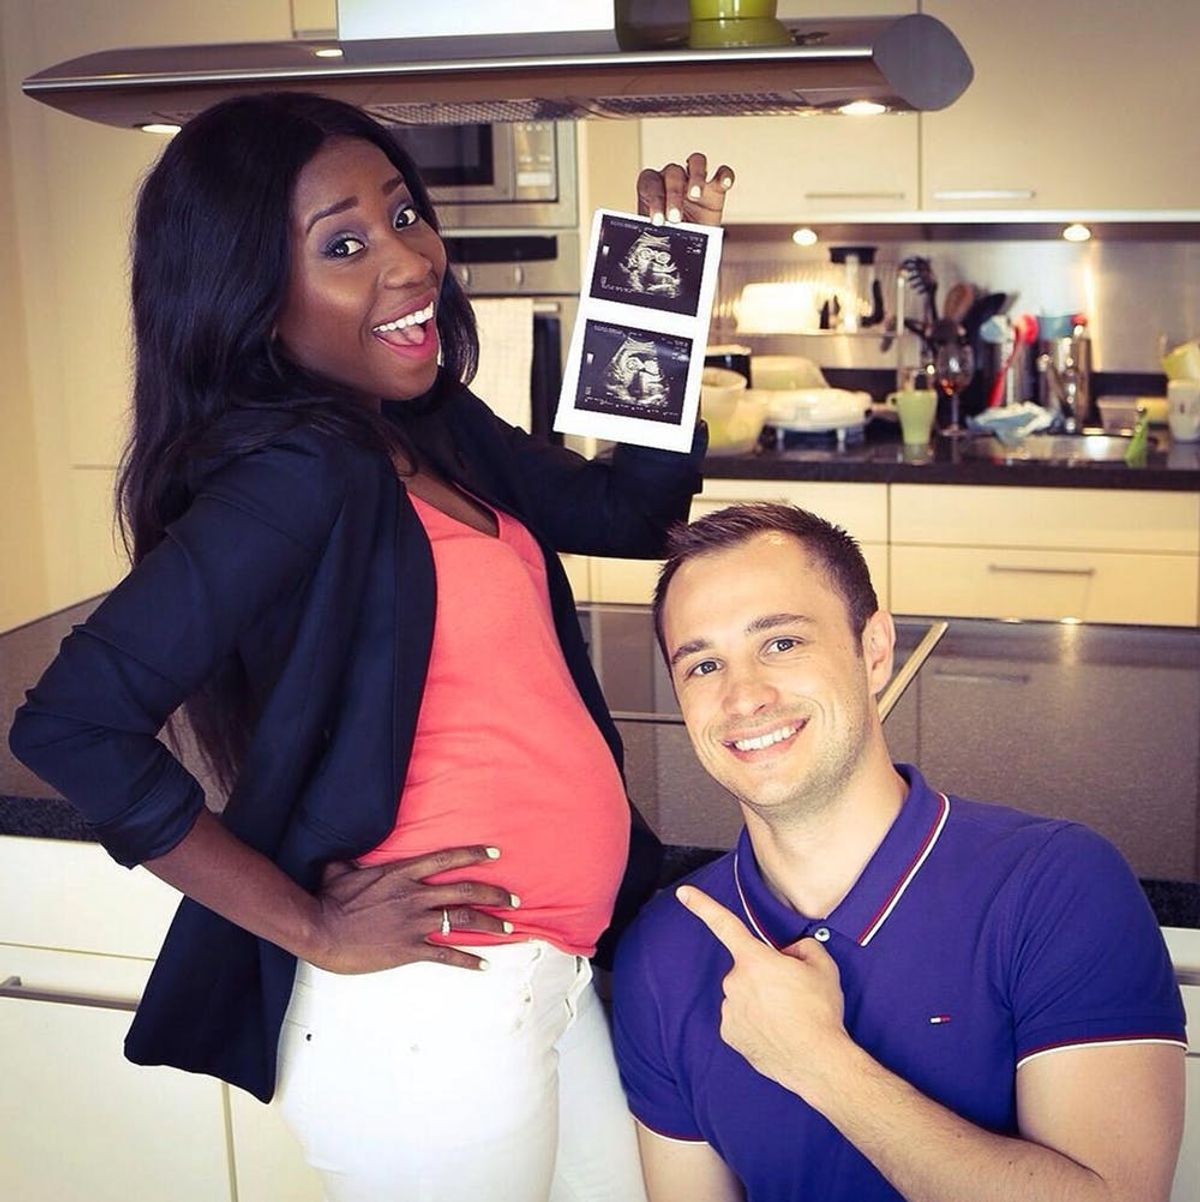 This Adorable Surprise Pregnancy Announcement Will Make You Cry